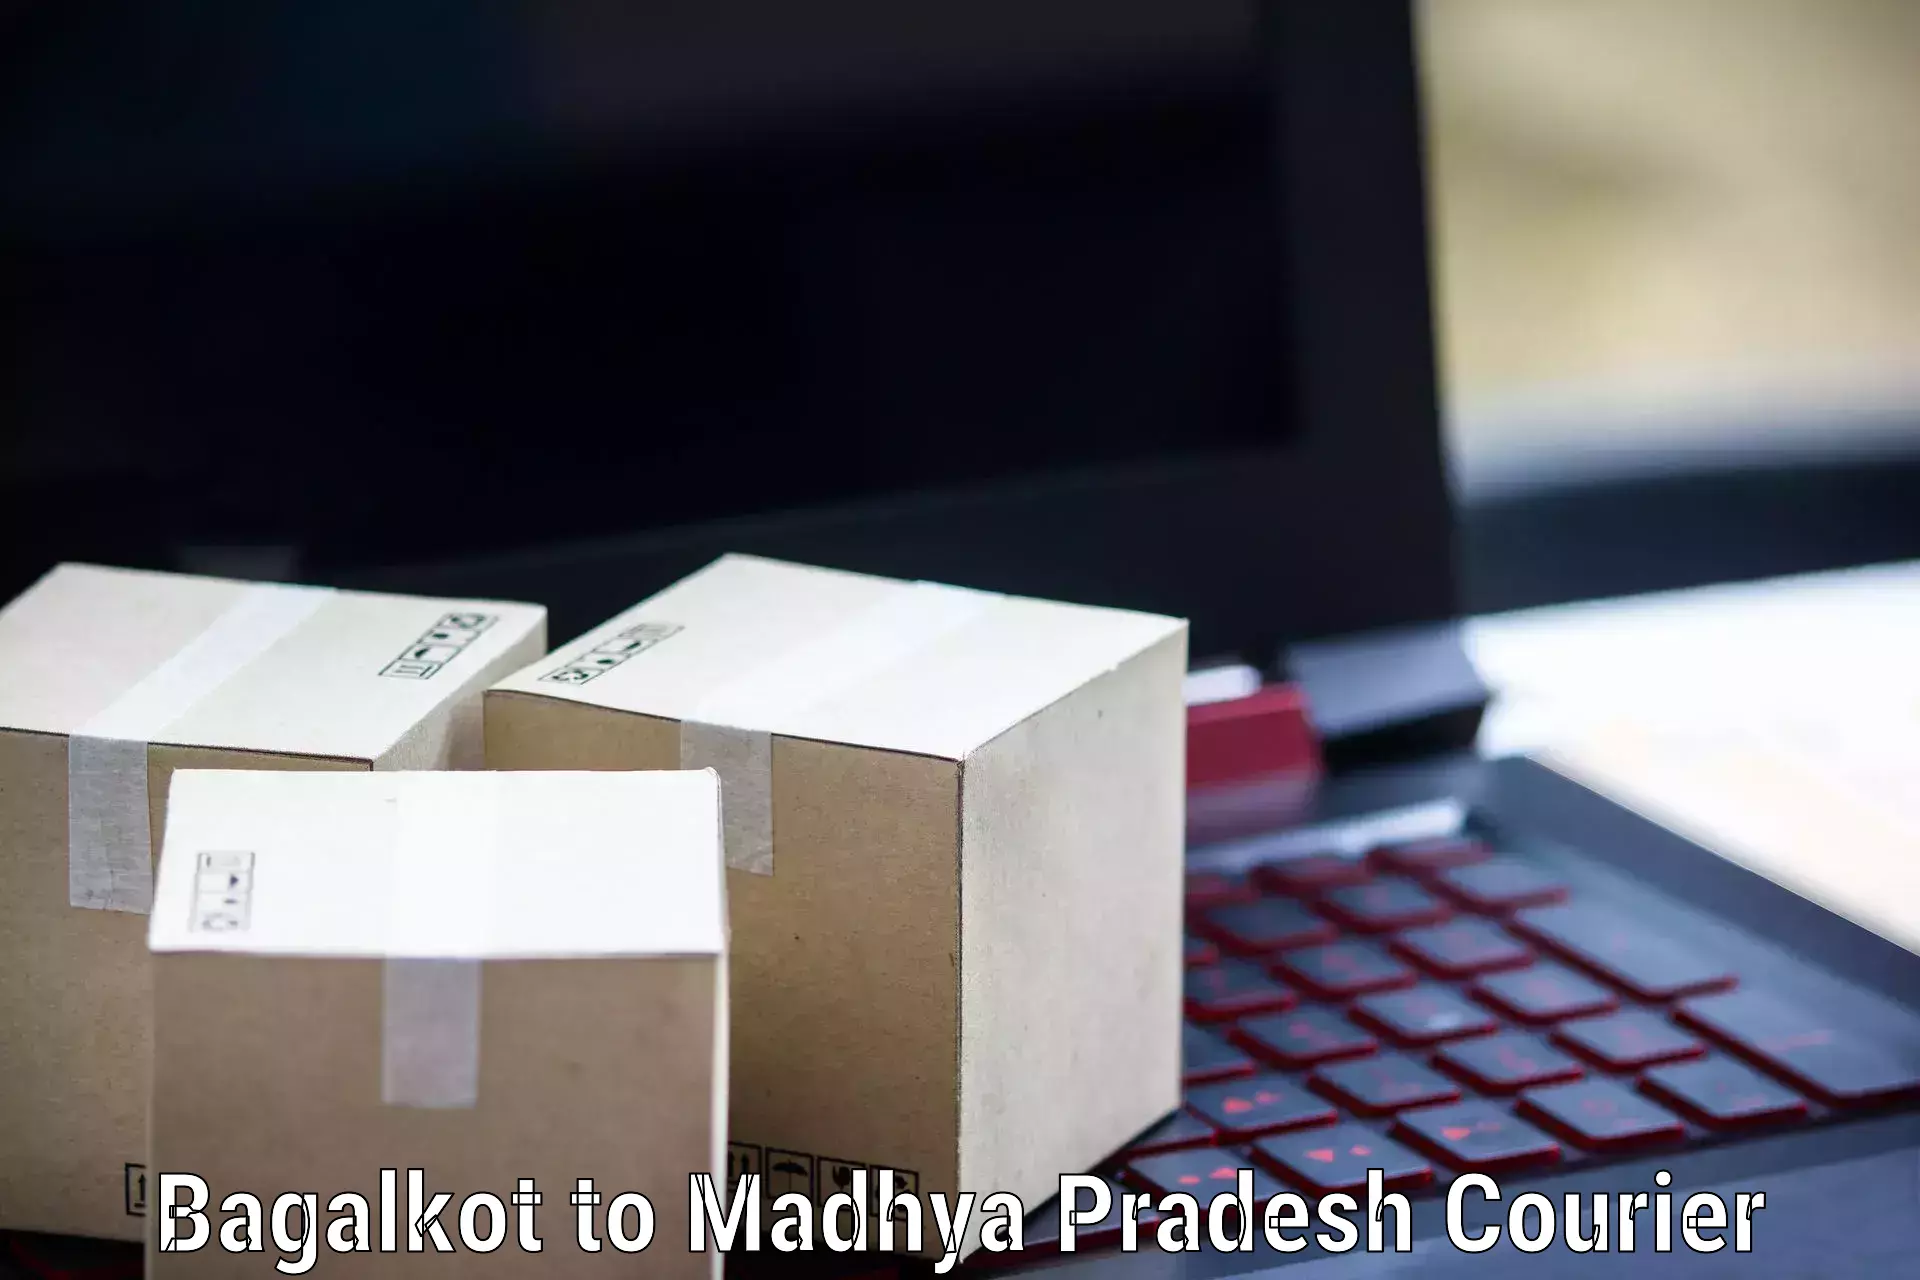 Courier dispatch services in Bagalkot to IIIT Bhopal